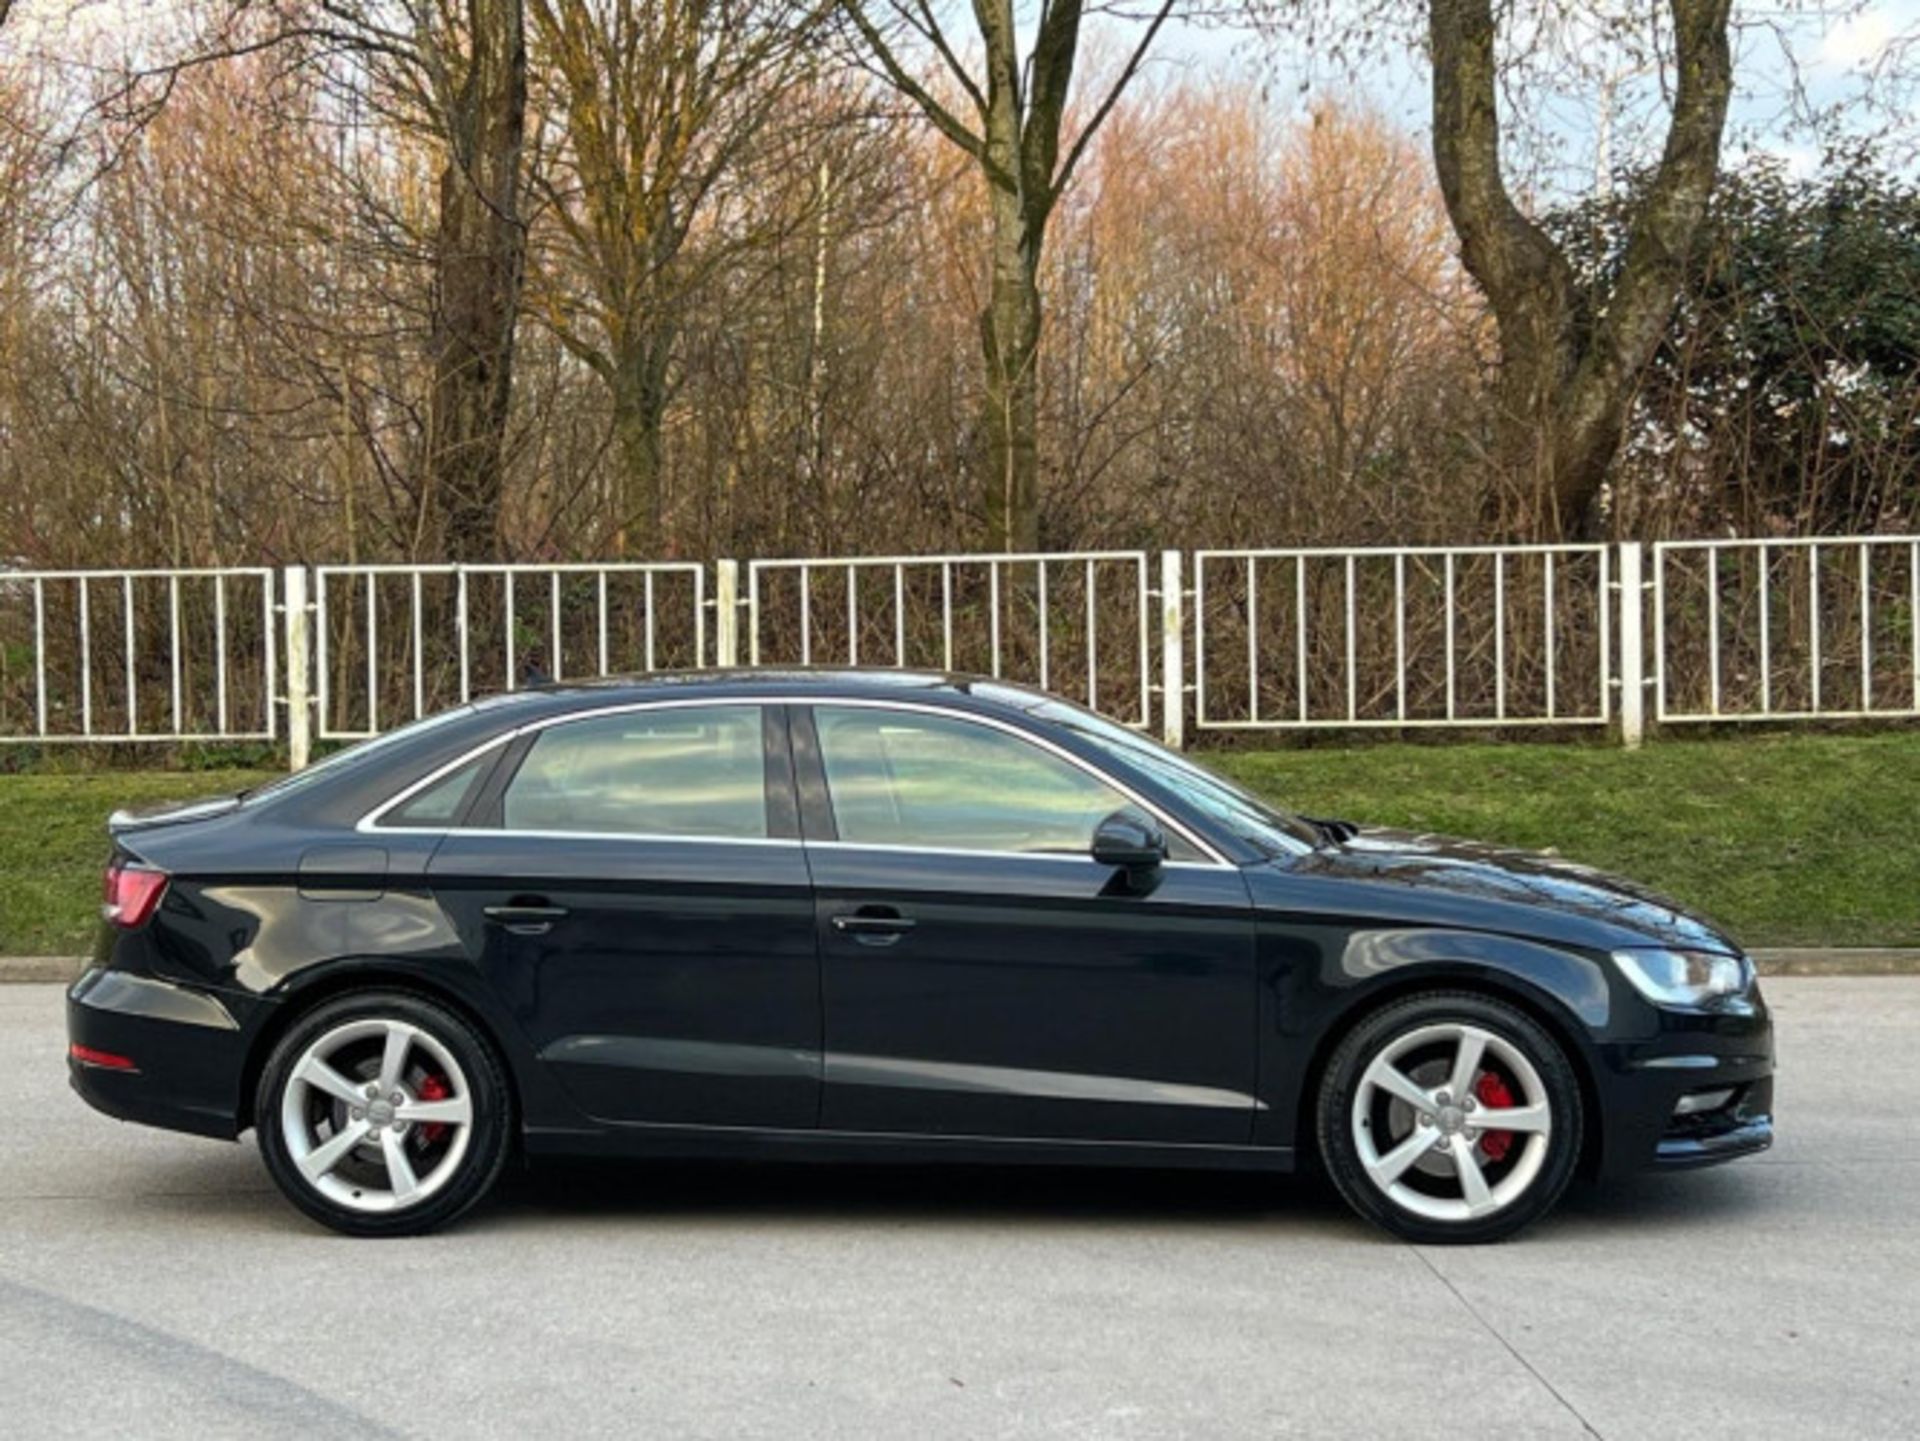 AUDI A3 2.0TDI SPORTBACK - STYLE, PERFORMANCE, AND COMFORT COMBINED >>--NO VAT ON HAMMER--<< - Image 213 of 216